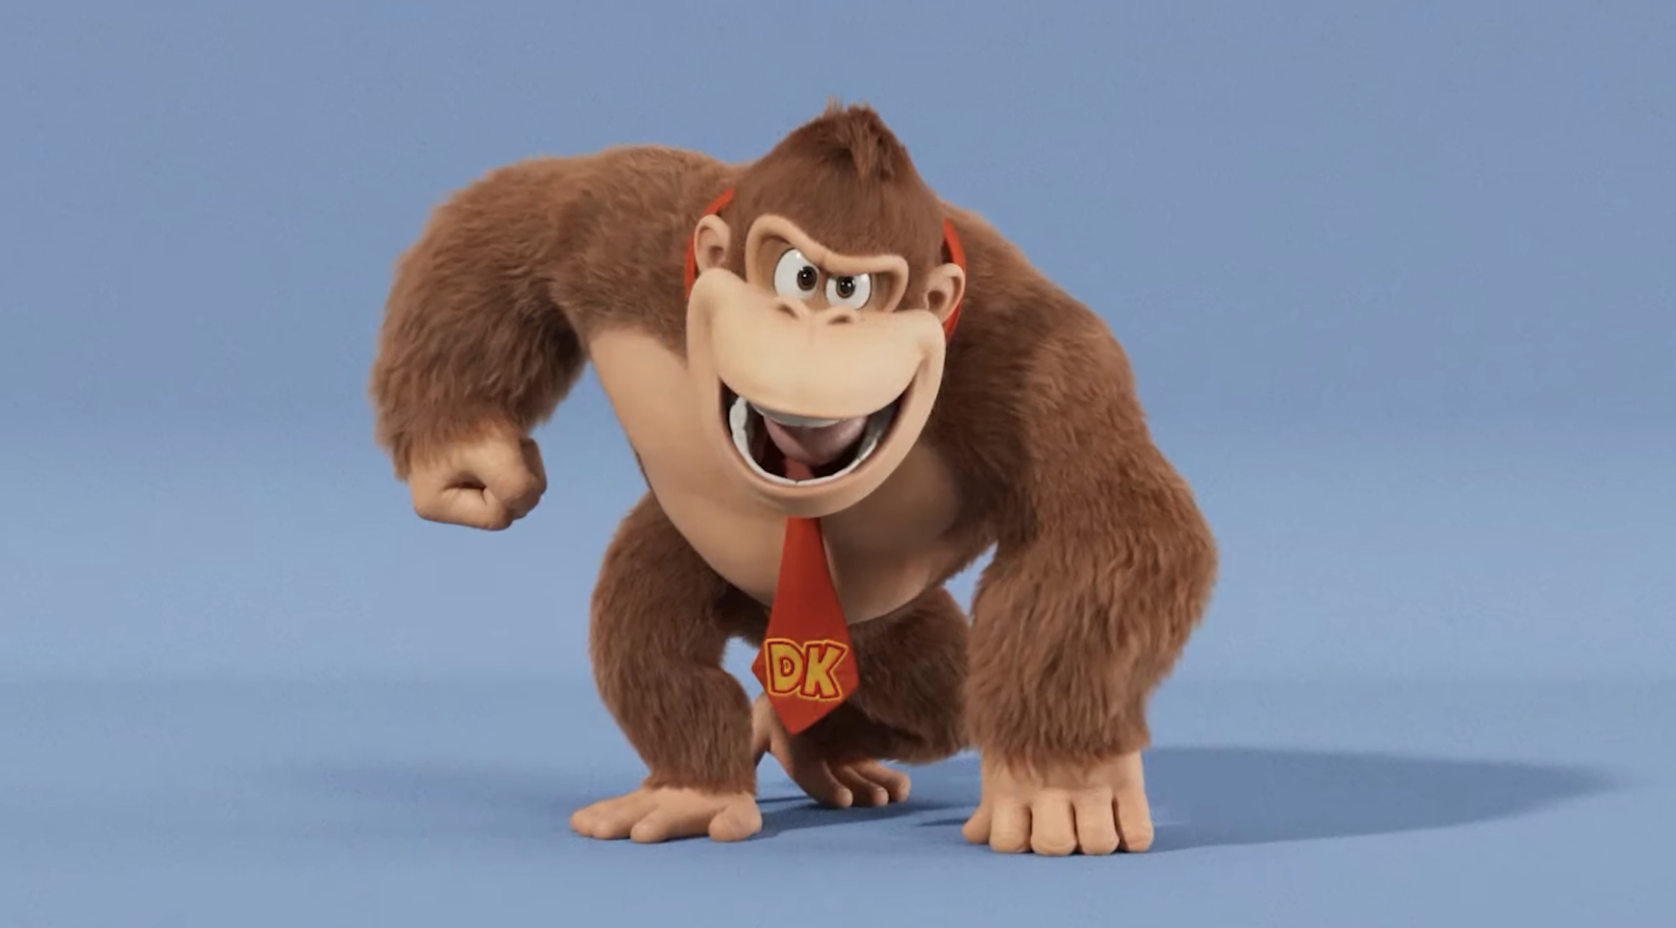 Donkey Kong as he appears in The Super Mario Bros. Movie. He looks like Donkey Kong normally does, with a red necktie — but his face is narrower and more mischievous. Perhaps...evil